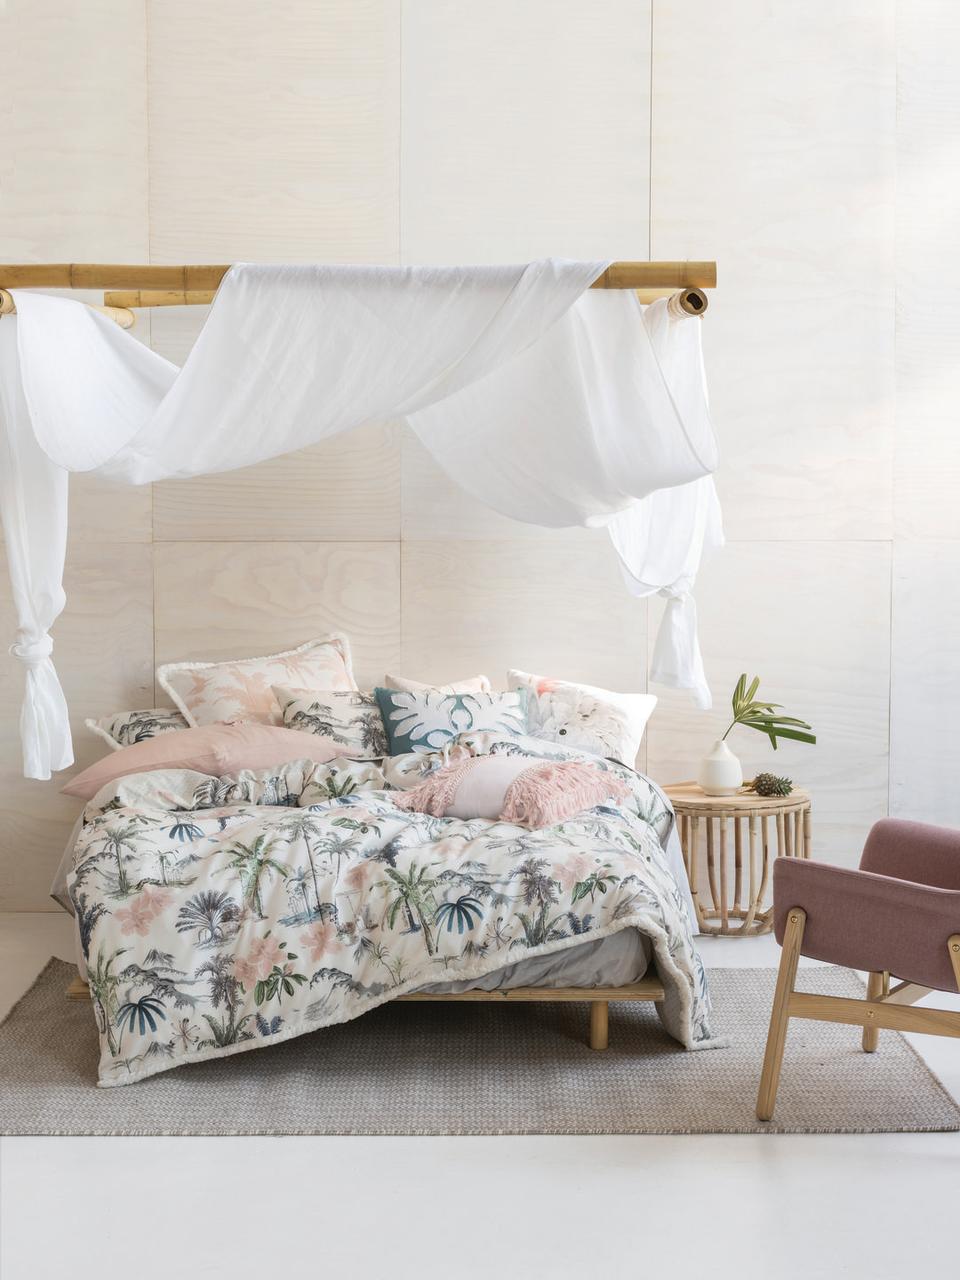 6) White bedroom ideas: tropical styling